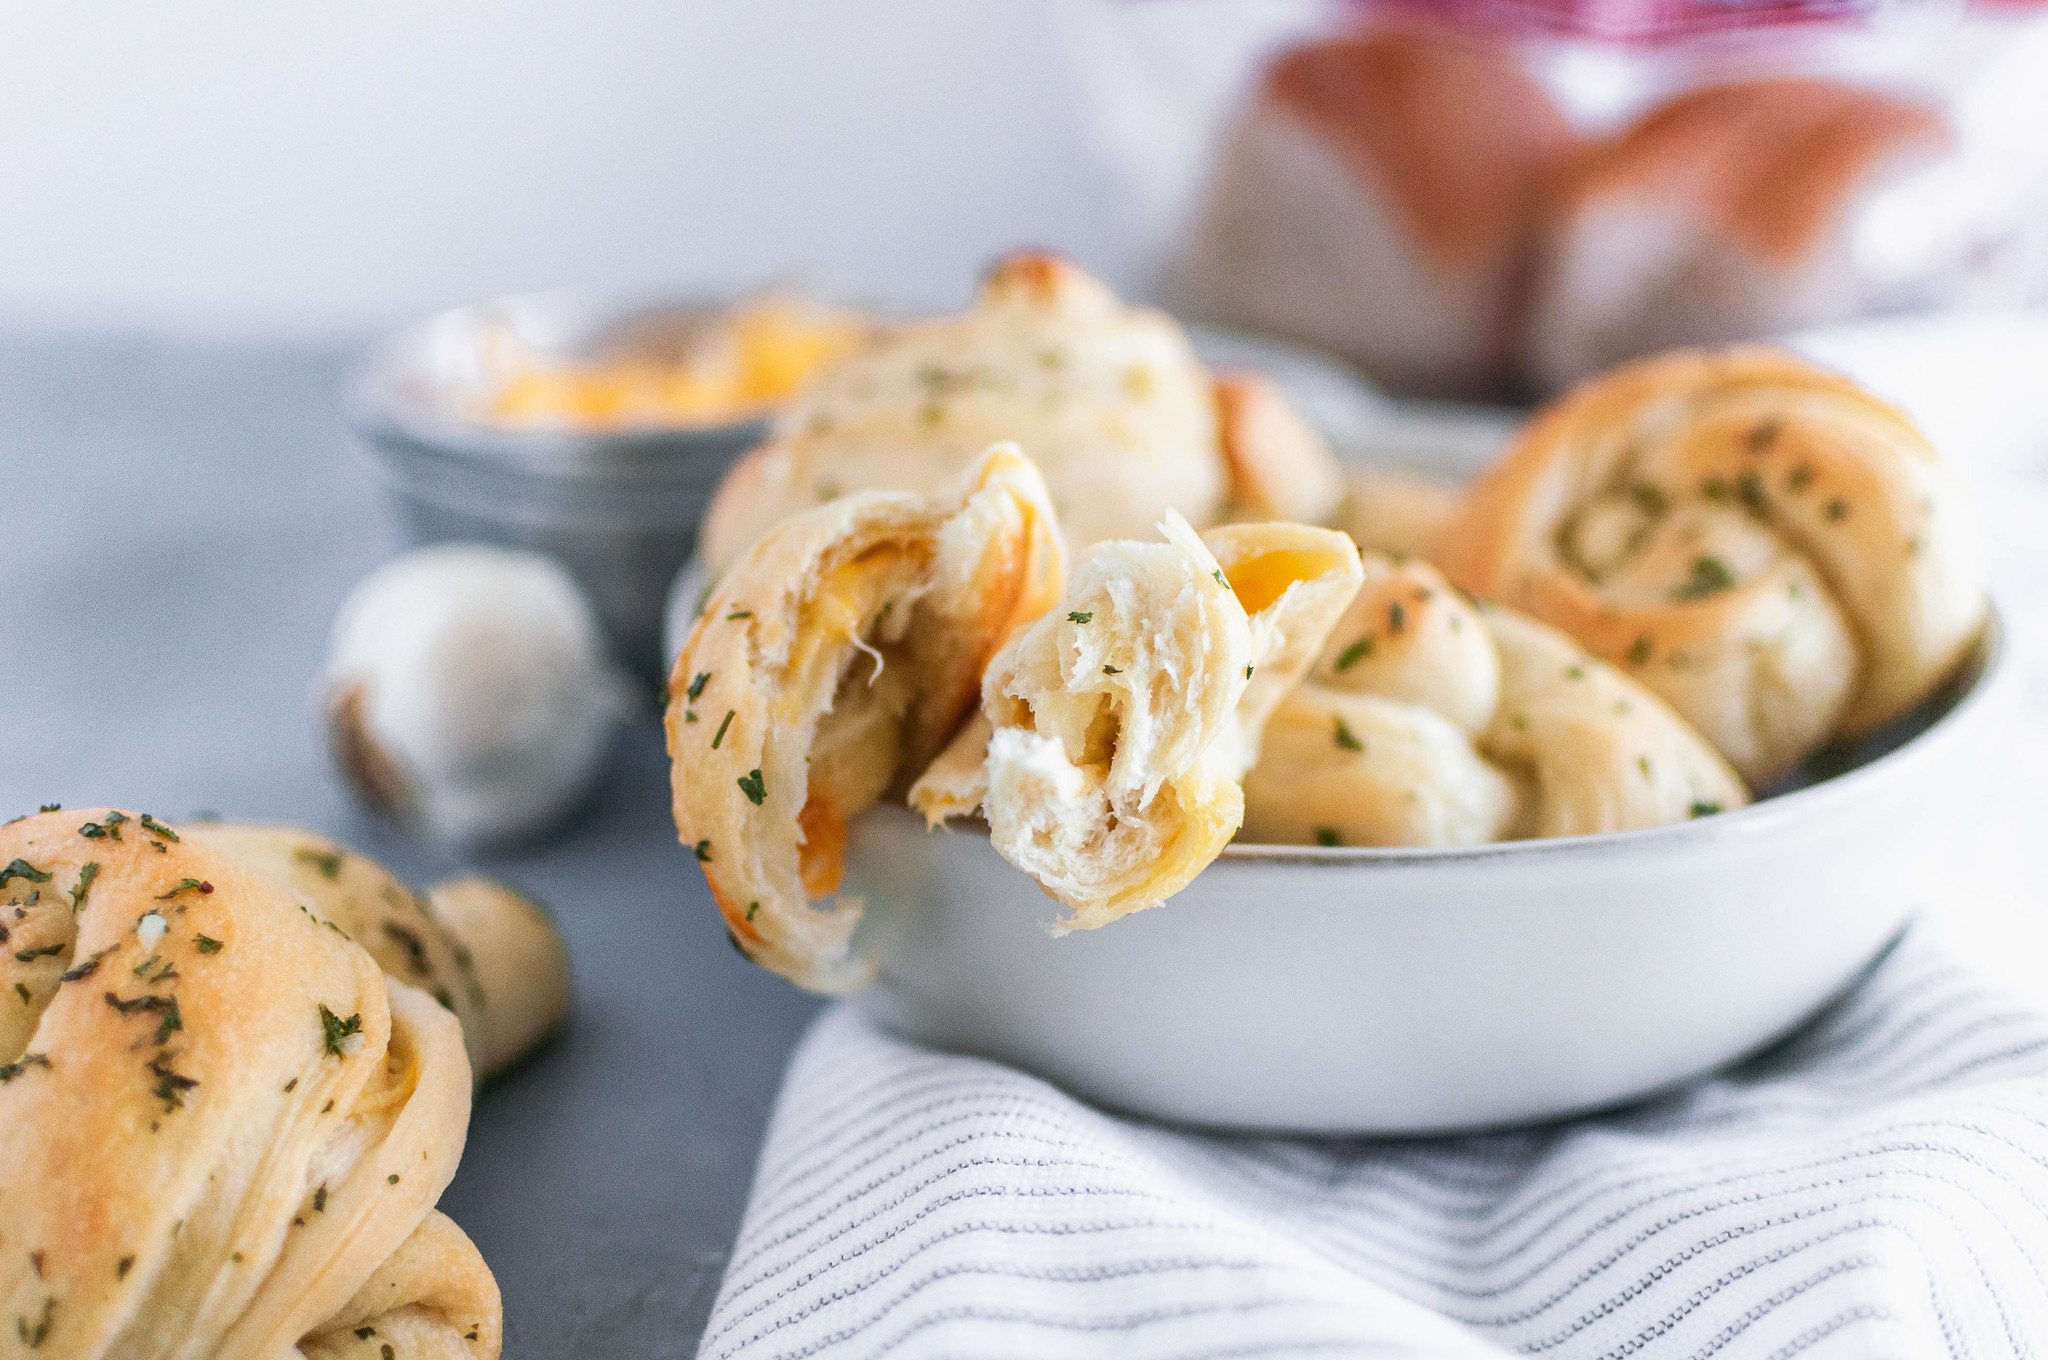 Make these simple, delicious, cheese stuffed Garlic Knots using Rhodes Bake-N-Serv Texas rolls for your next holiday dinner. Simple to make and taste homemade! Check out the step-by-step tutorial for these super simple rolls.